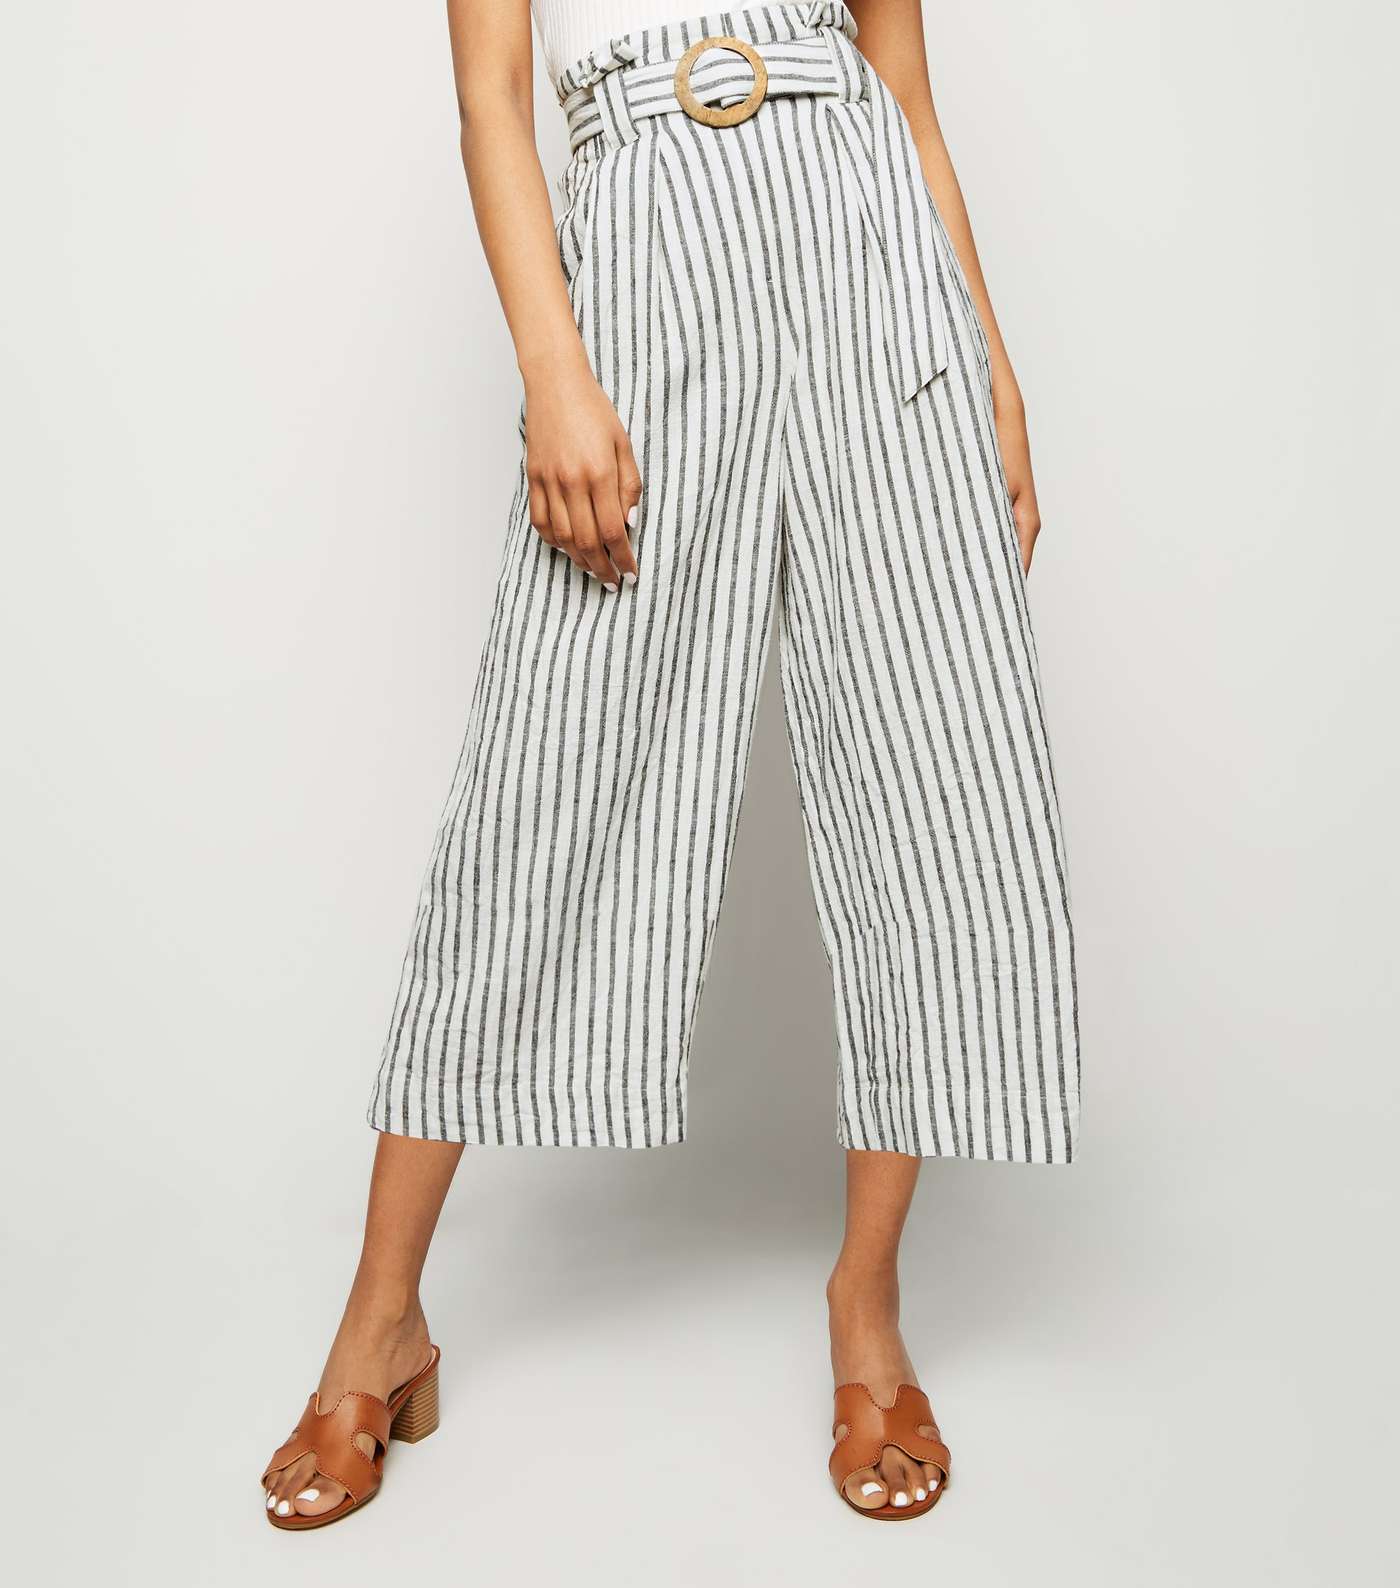 Petite Off White Linen Blend Cropped Trousers Image 2